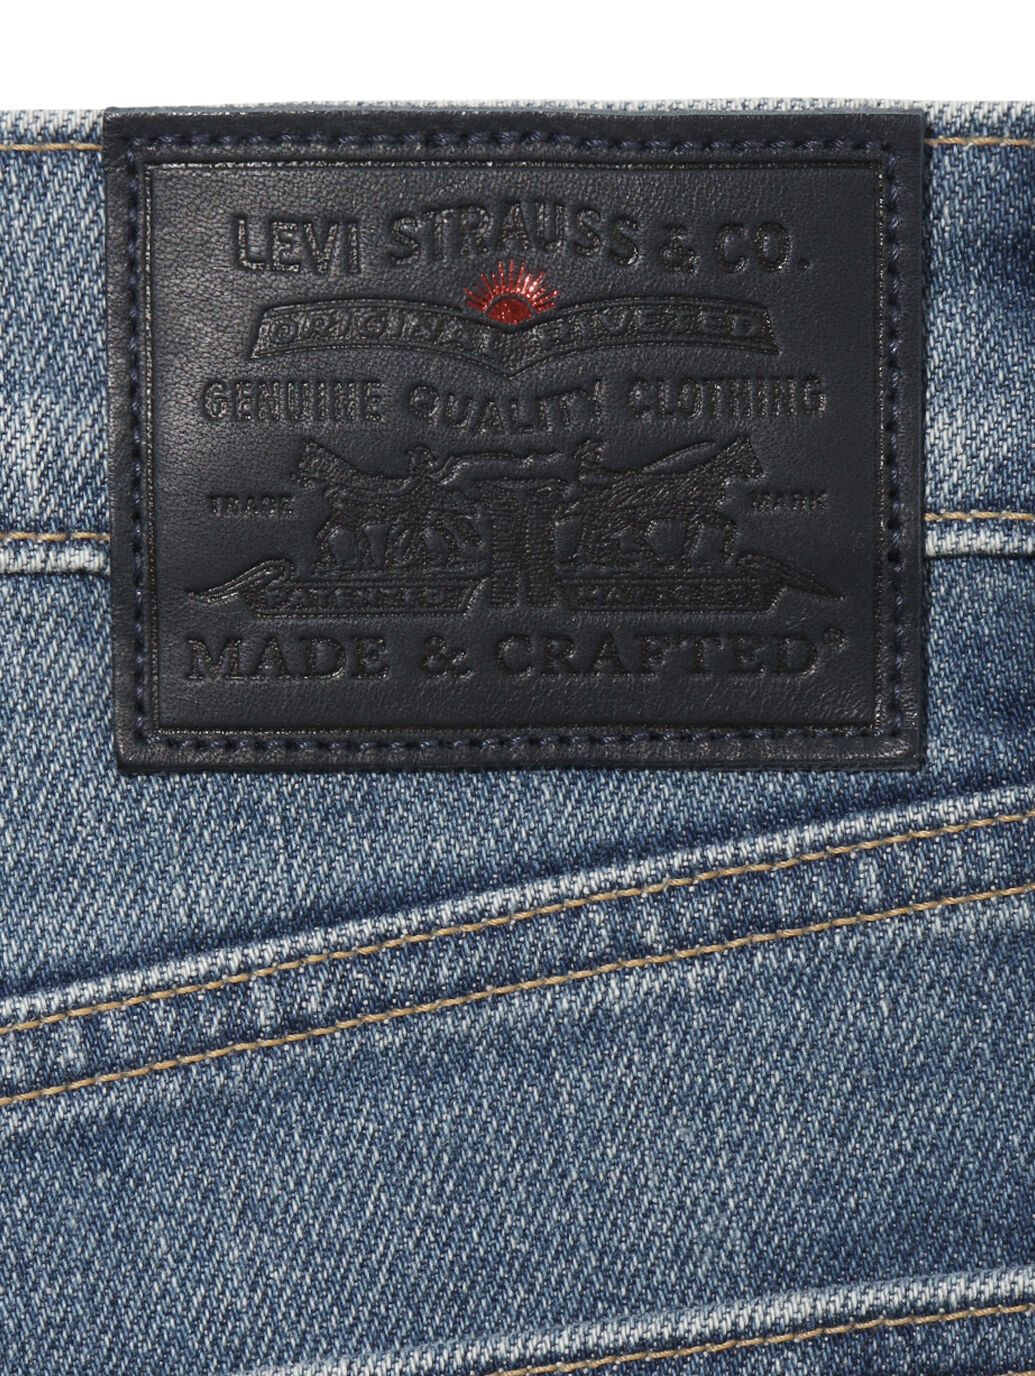 LEVI'S® MADE&CRAFTED®ハイライズ BORROWED FROM THE BOYS｜リーバイス